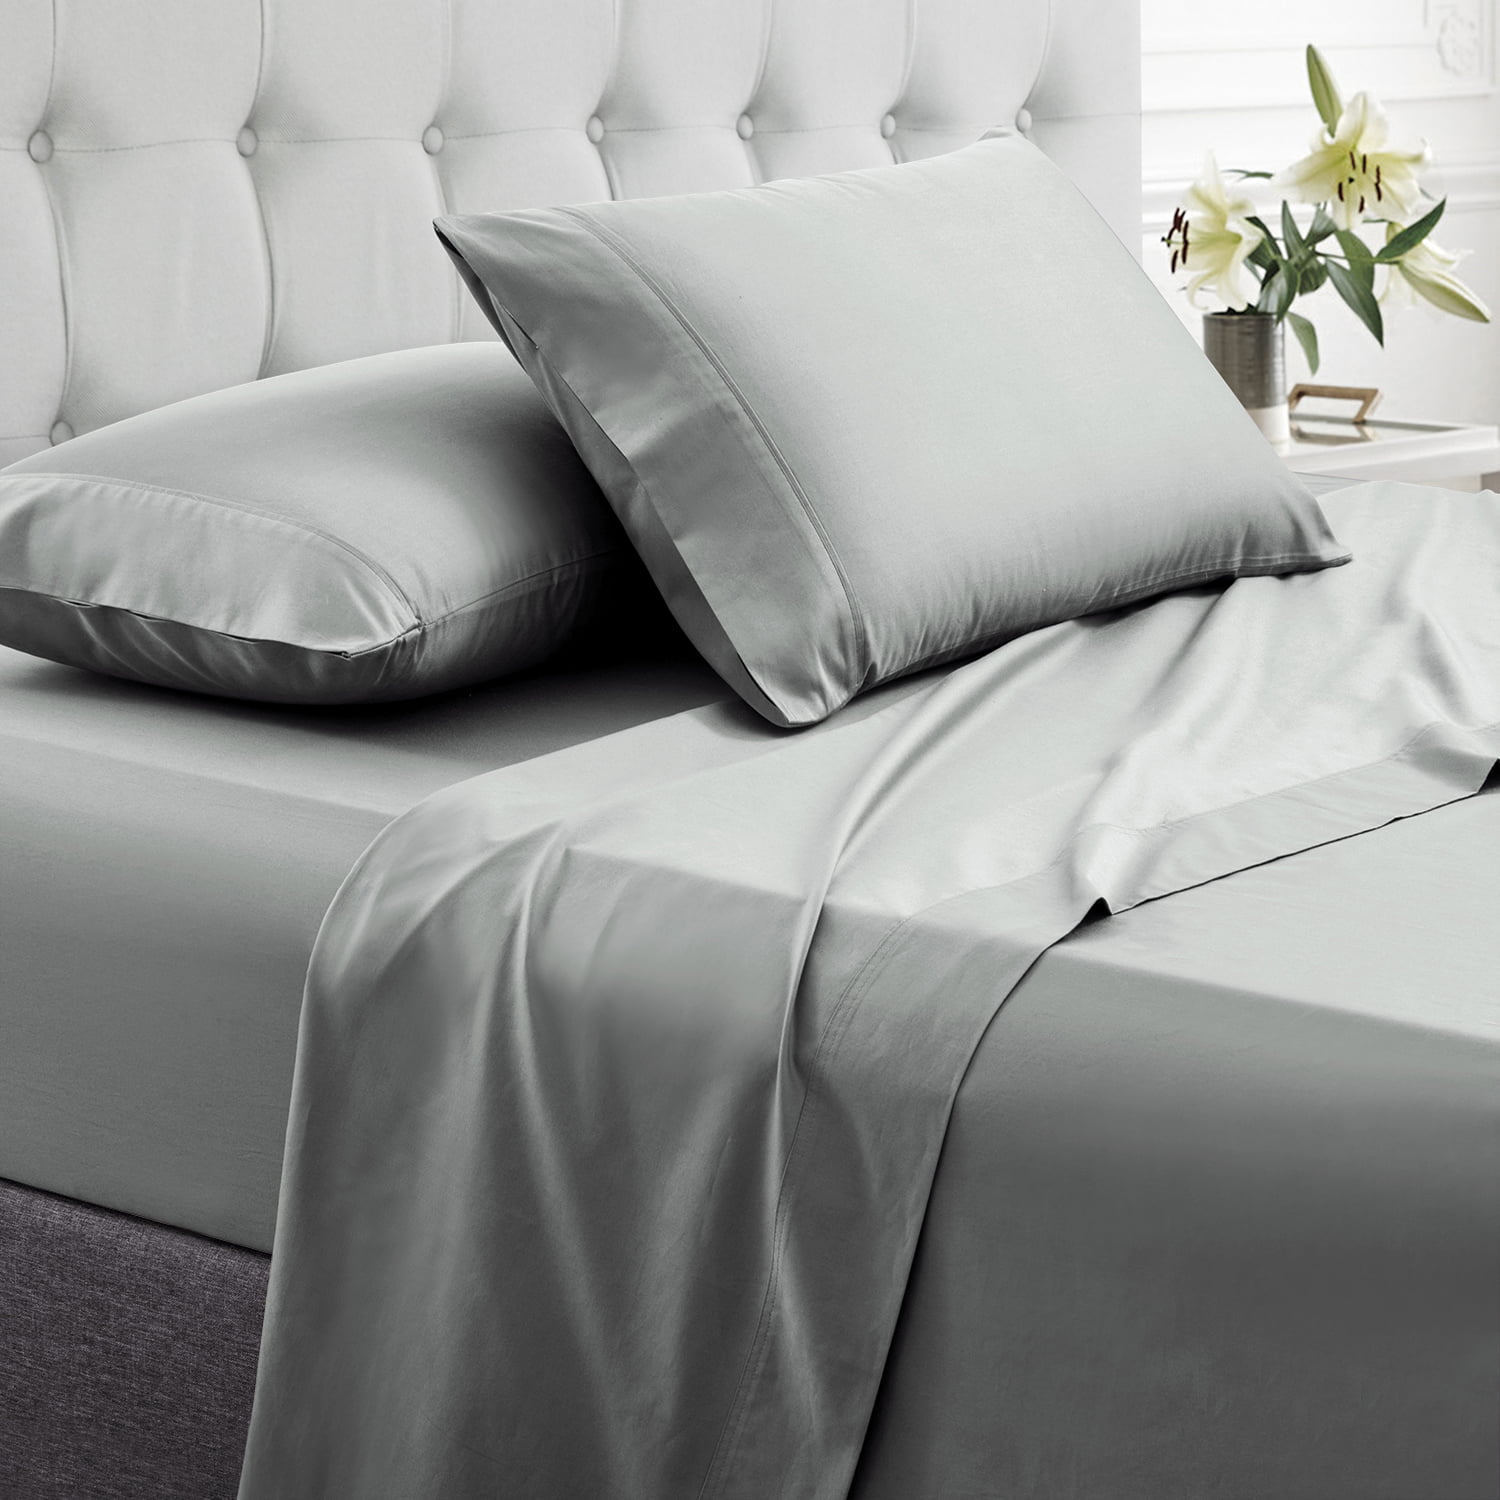 FITTED,FLAT SHEET BEDDING 100% EGYPTIAN COTTON 200 THREAD COUNT DUVET COVER SET 